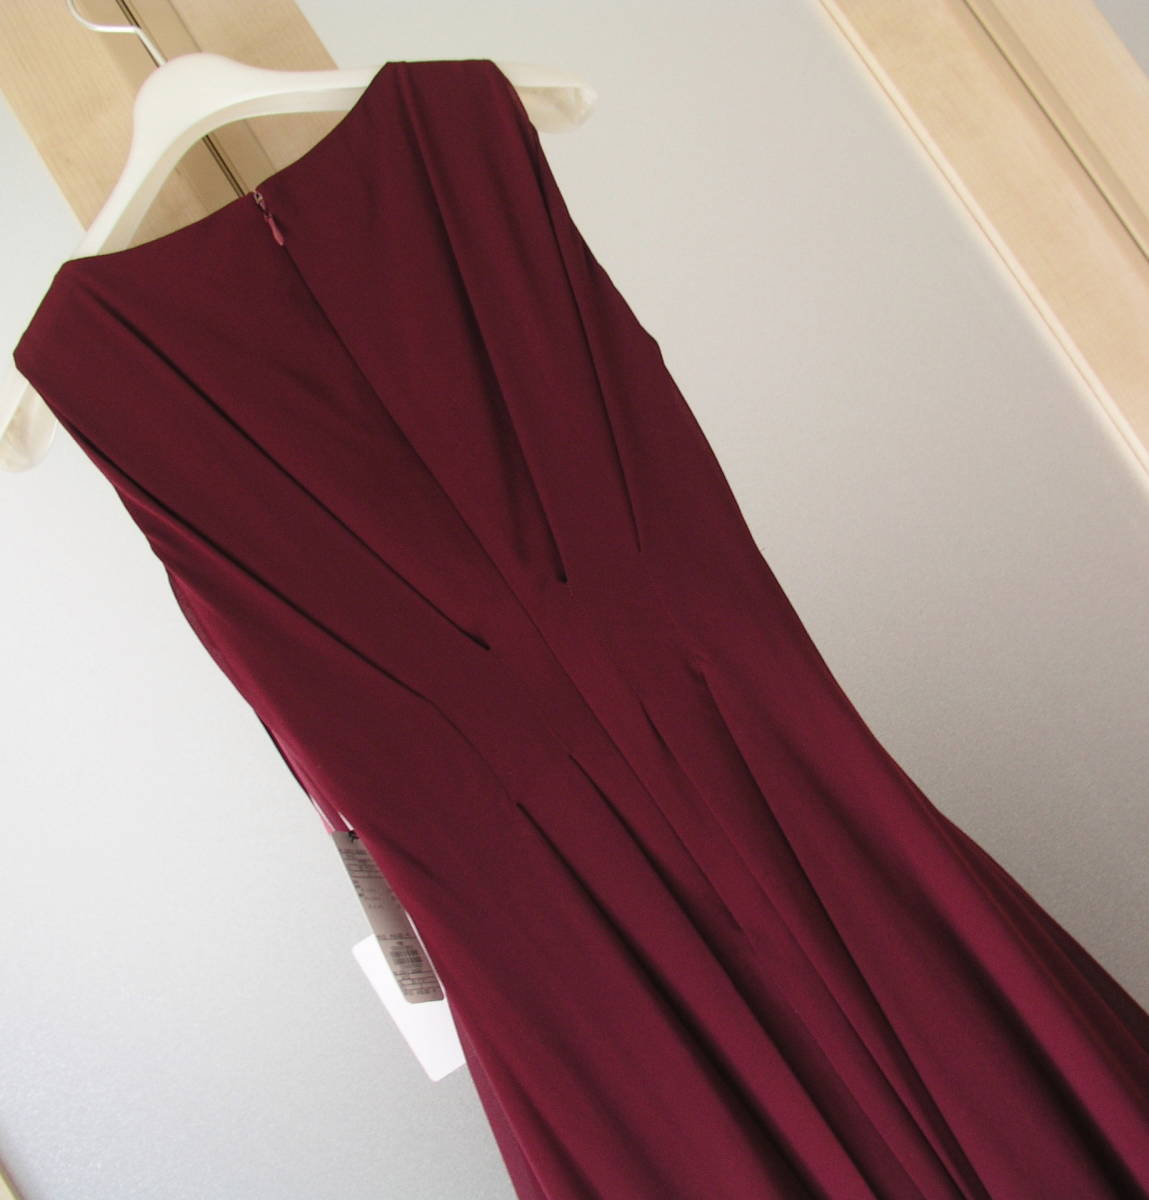  wedding *. call * beautiful Silhouette dress *size2|9 number |M* bordeaux Y19,440. . goods 